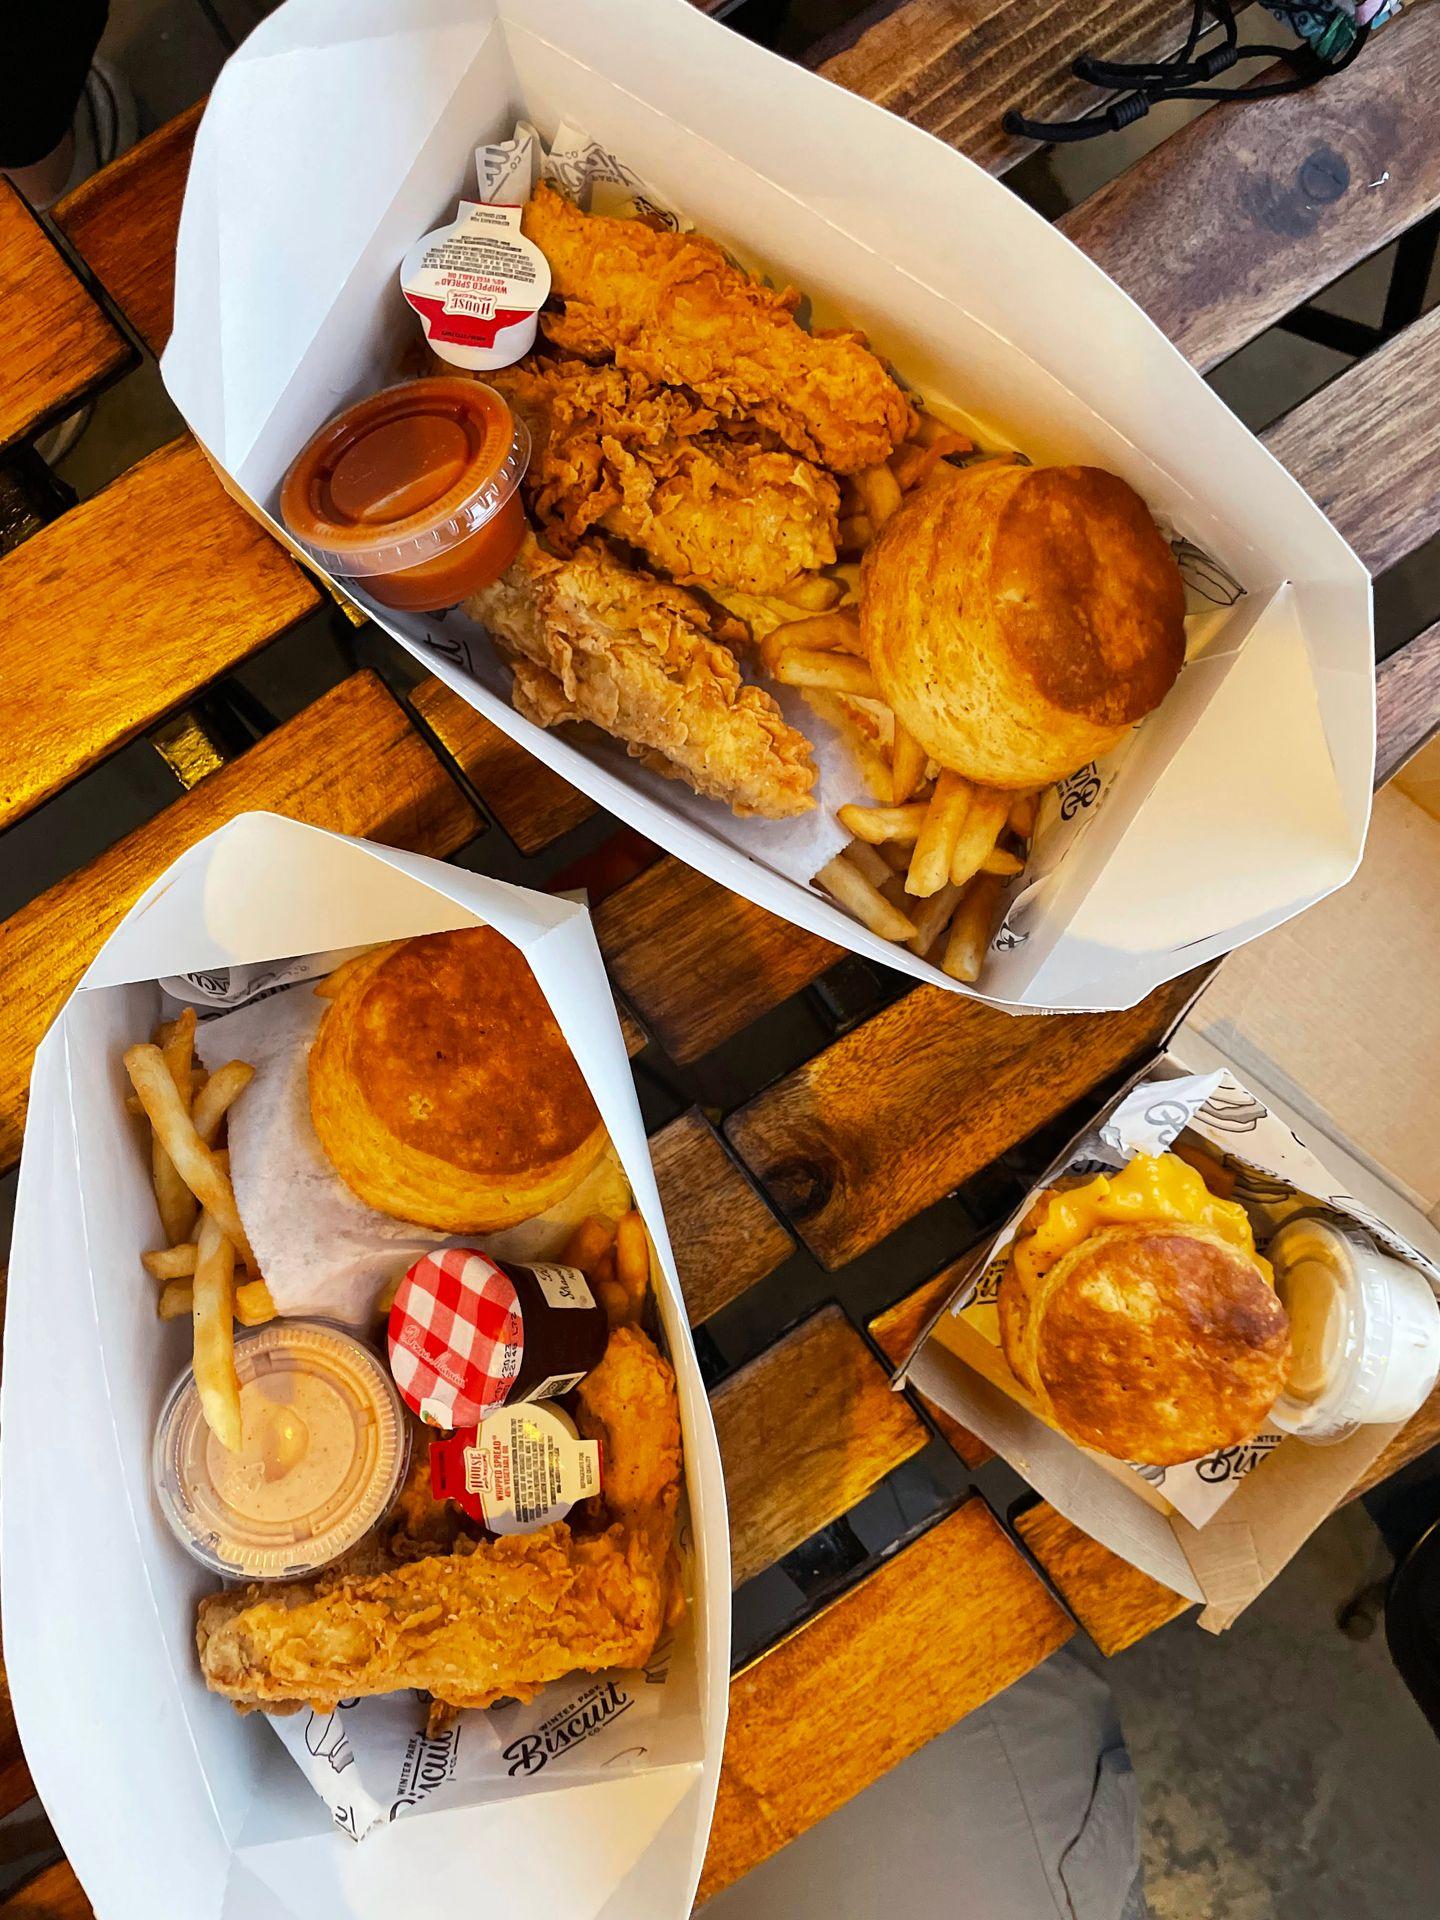 Some paper baskets with fried chicken, biscuits, french fries and sauces.